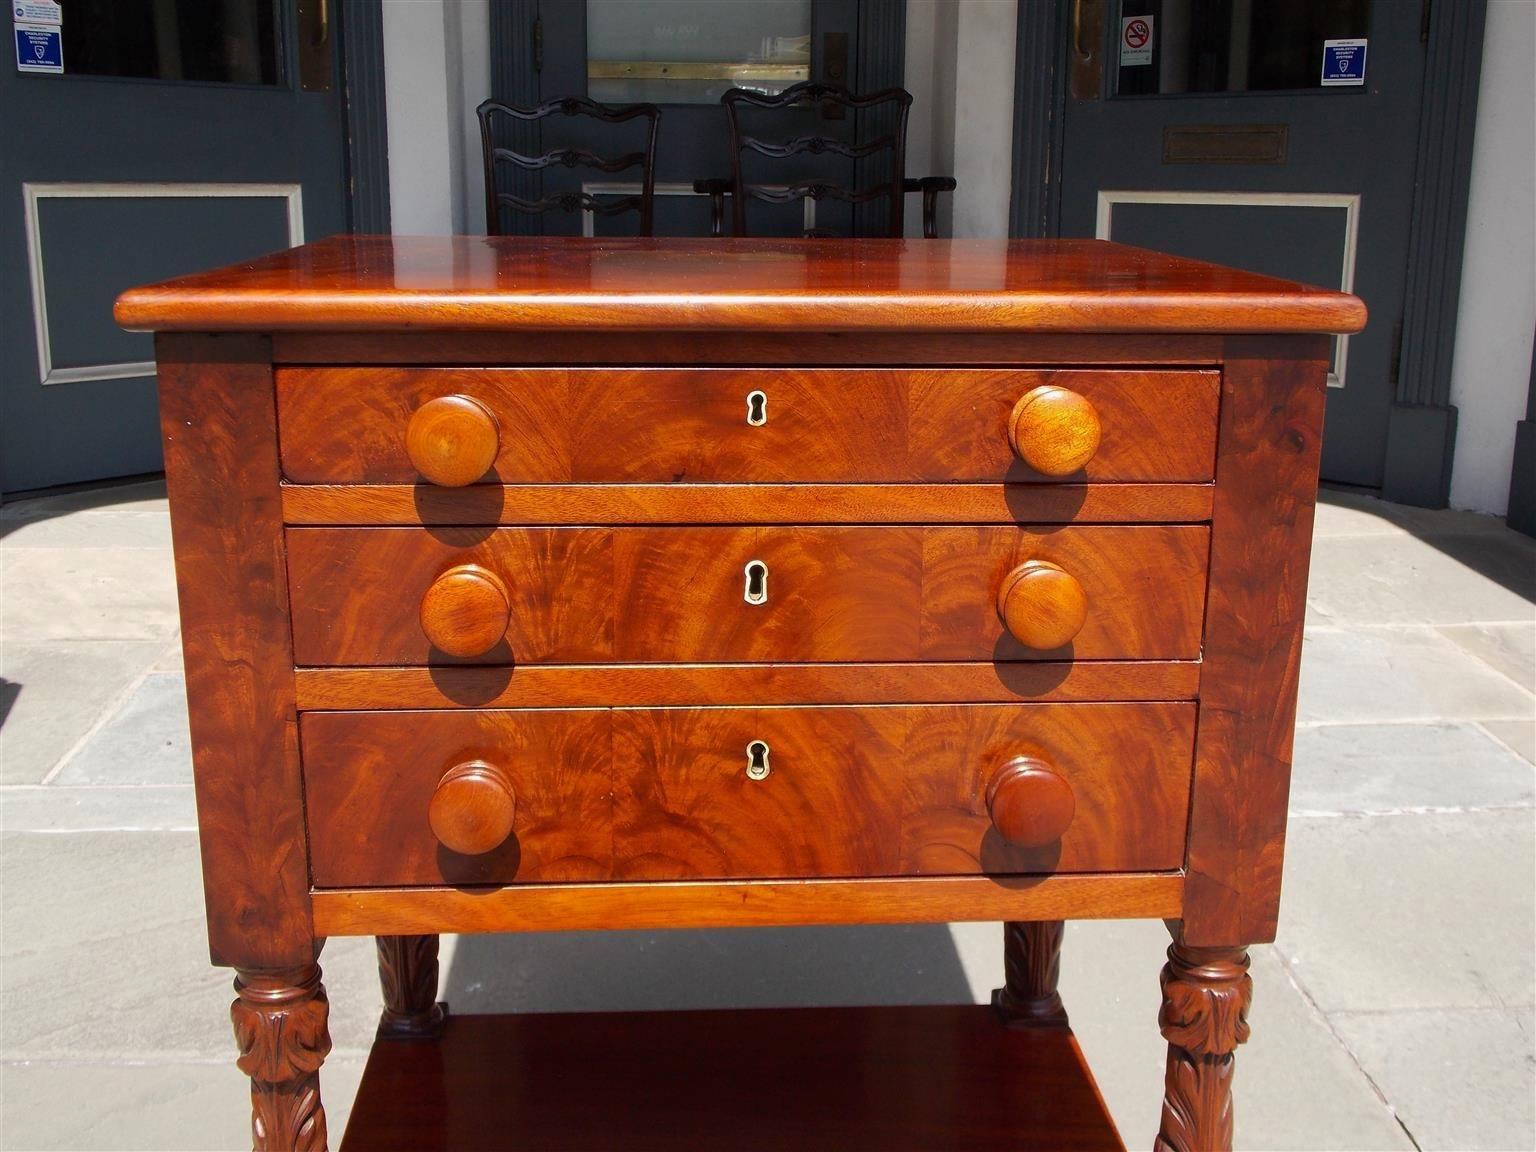 Early 19th Century American Sheraton Mahogany Three-Drawer Acanthus Carved Side Table, Circa 1820